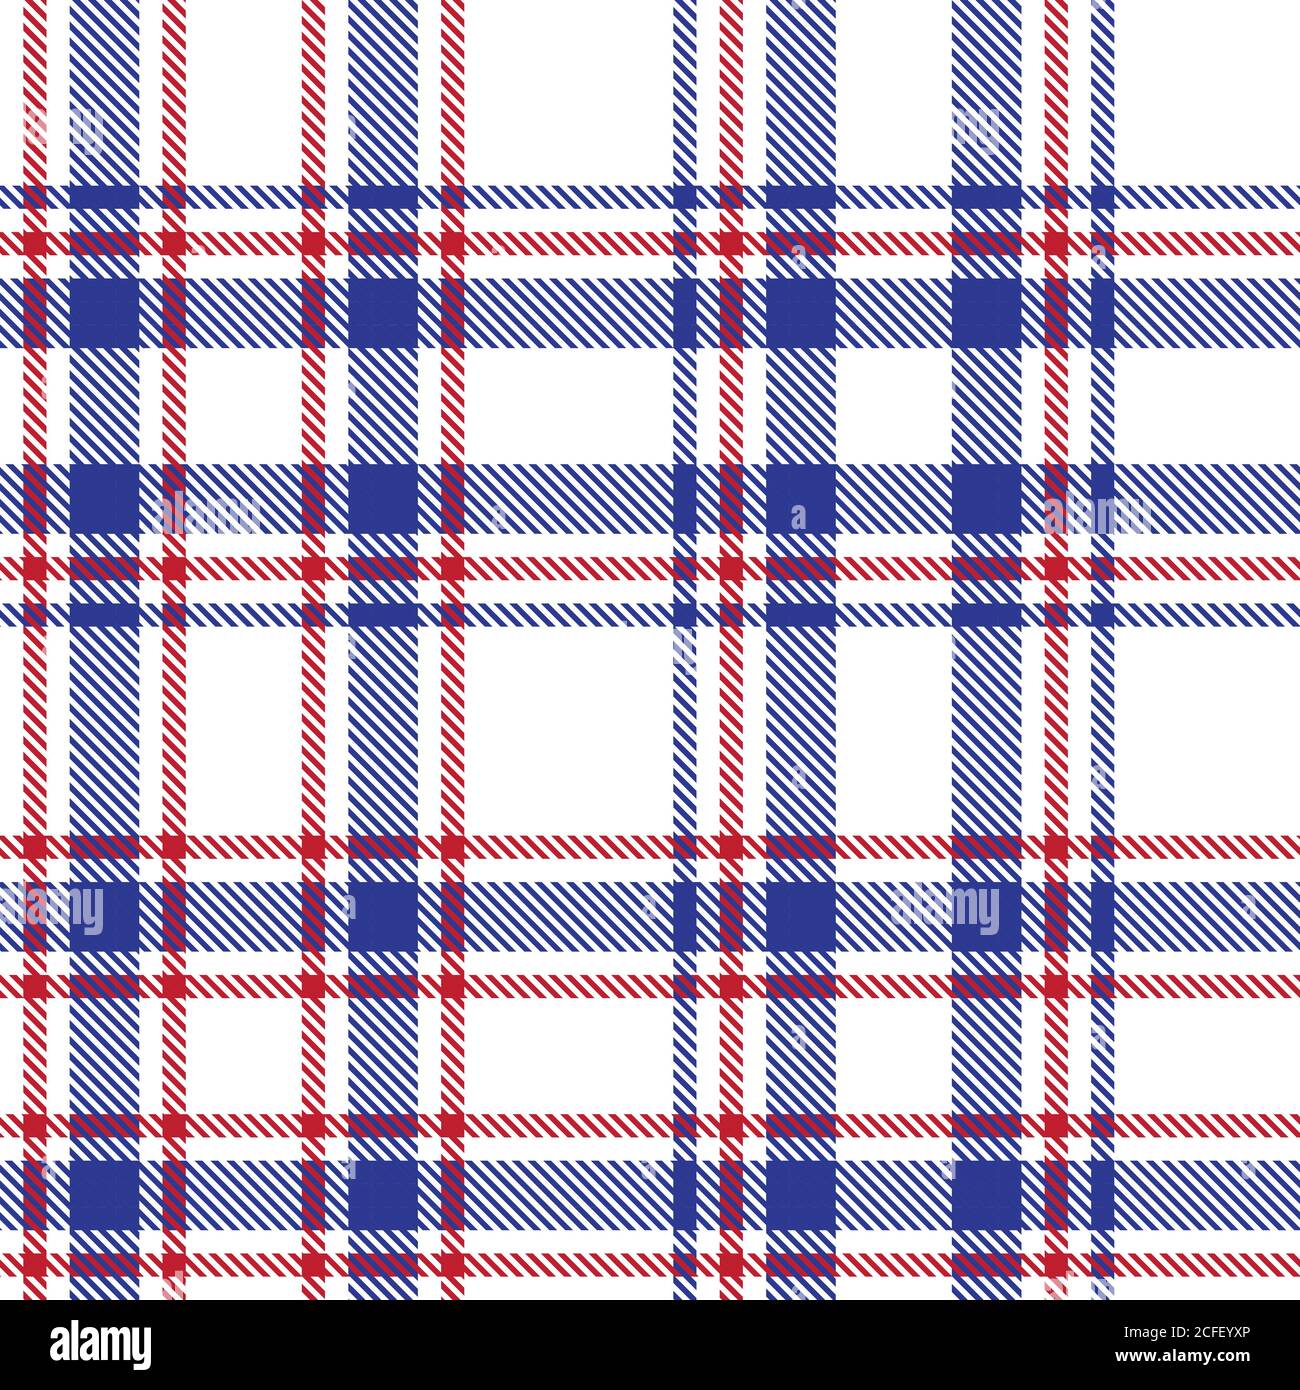 Glen Plaid textured seamless pattern suitable for fashion textiles and graphics Stock Vector